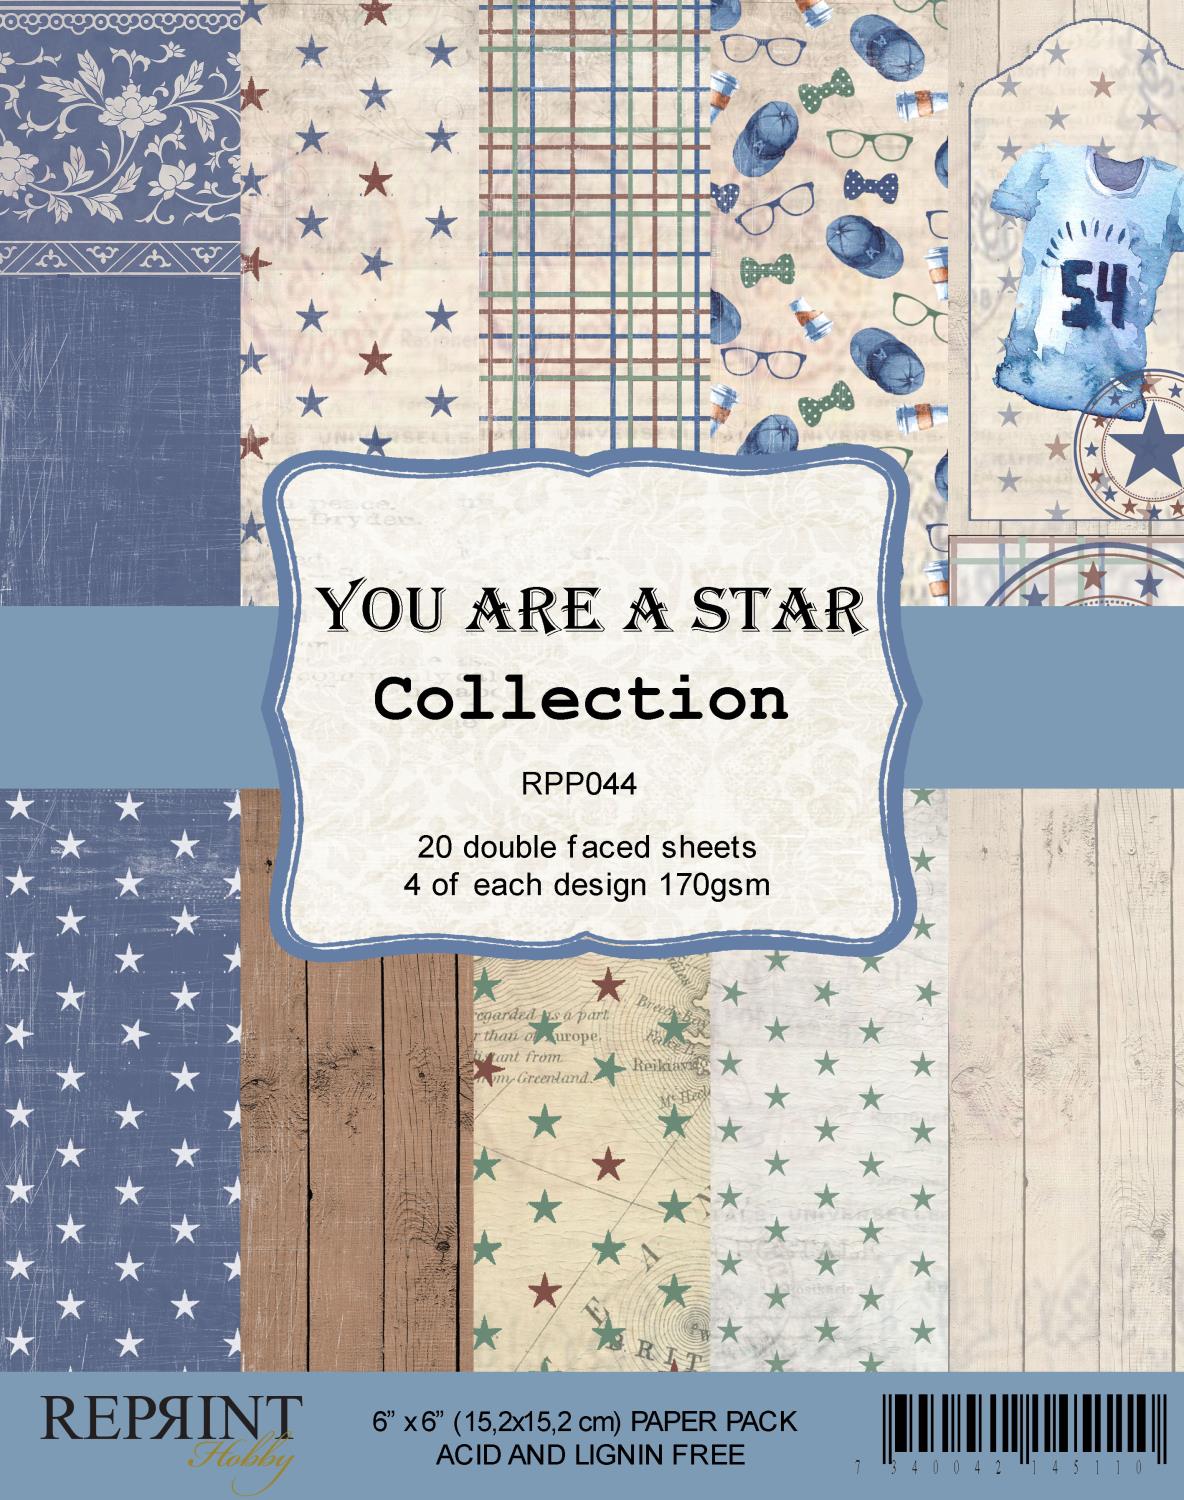 Reprint - You are a star - 6x6